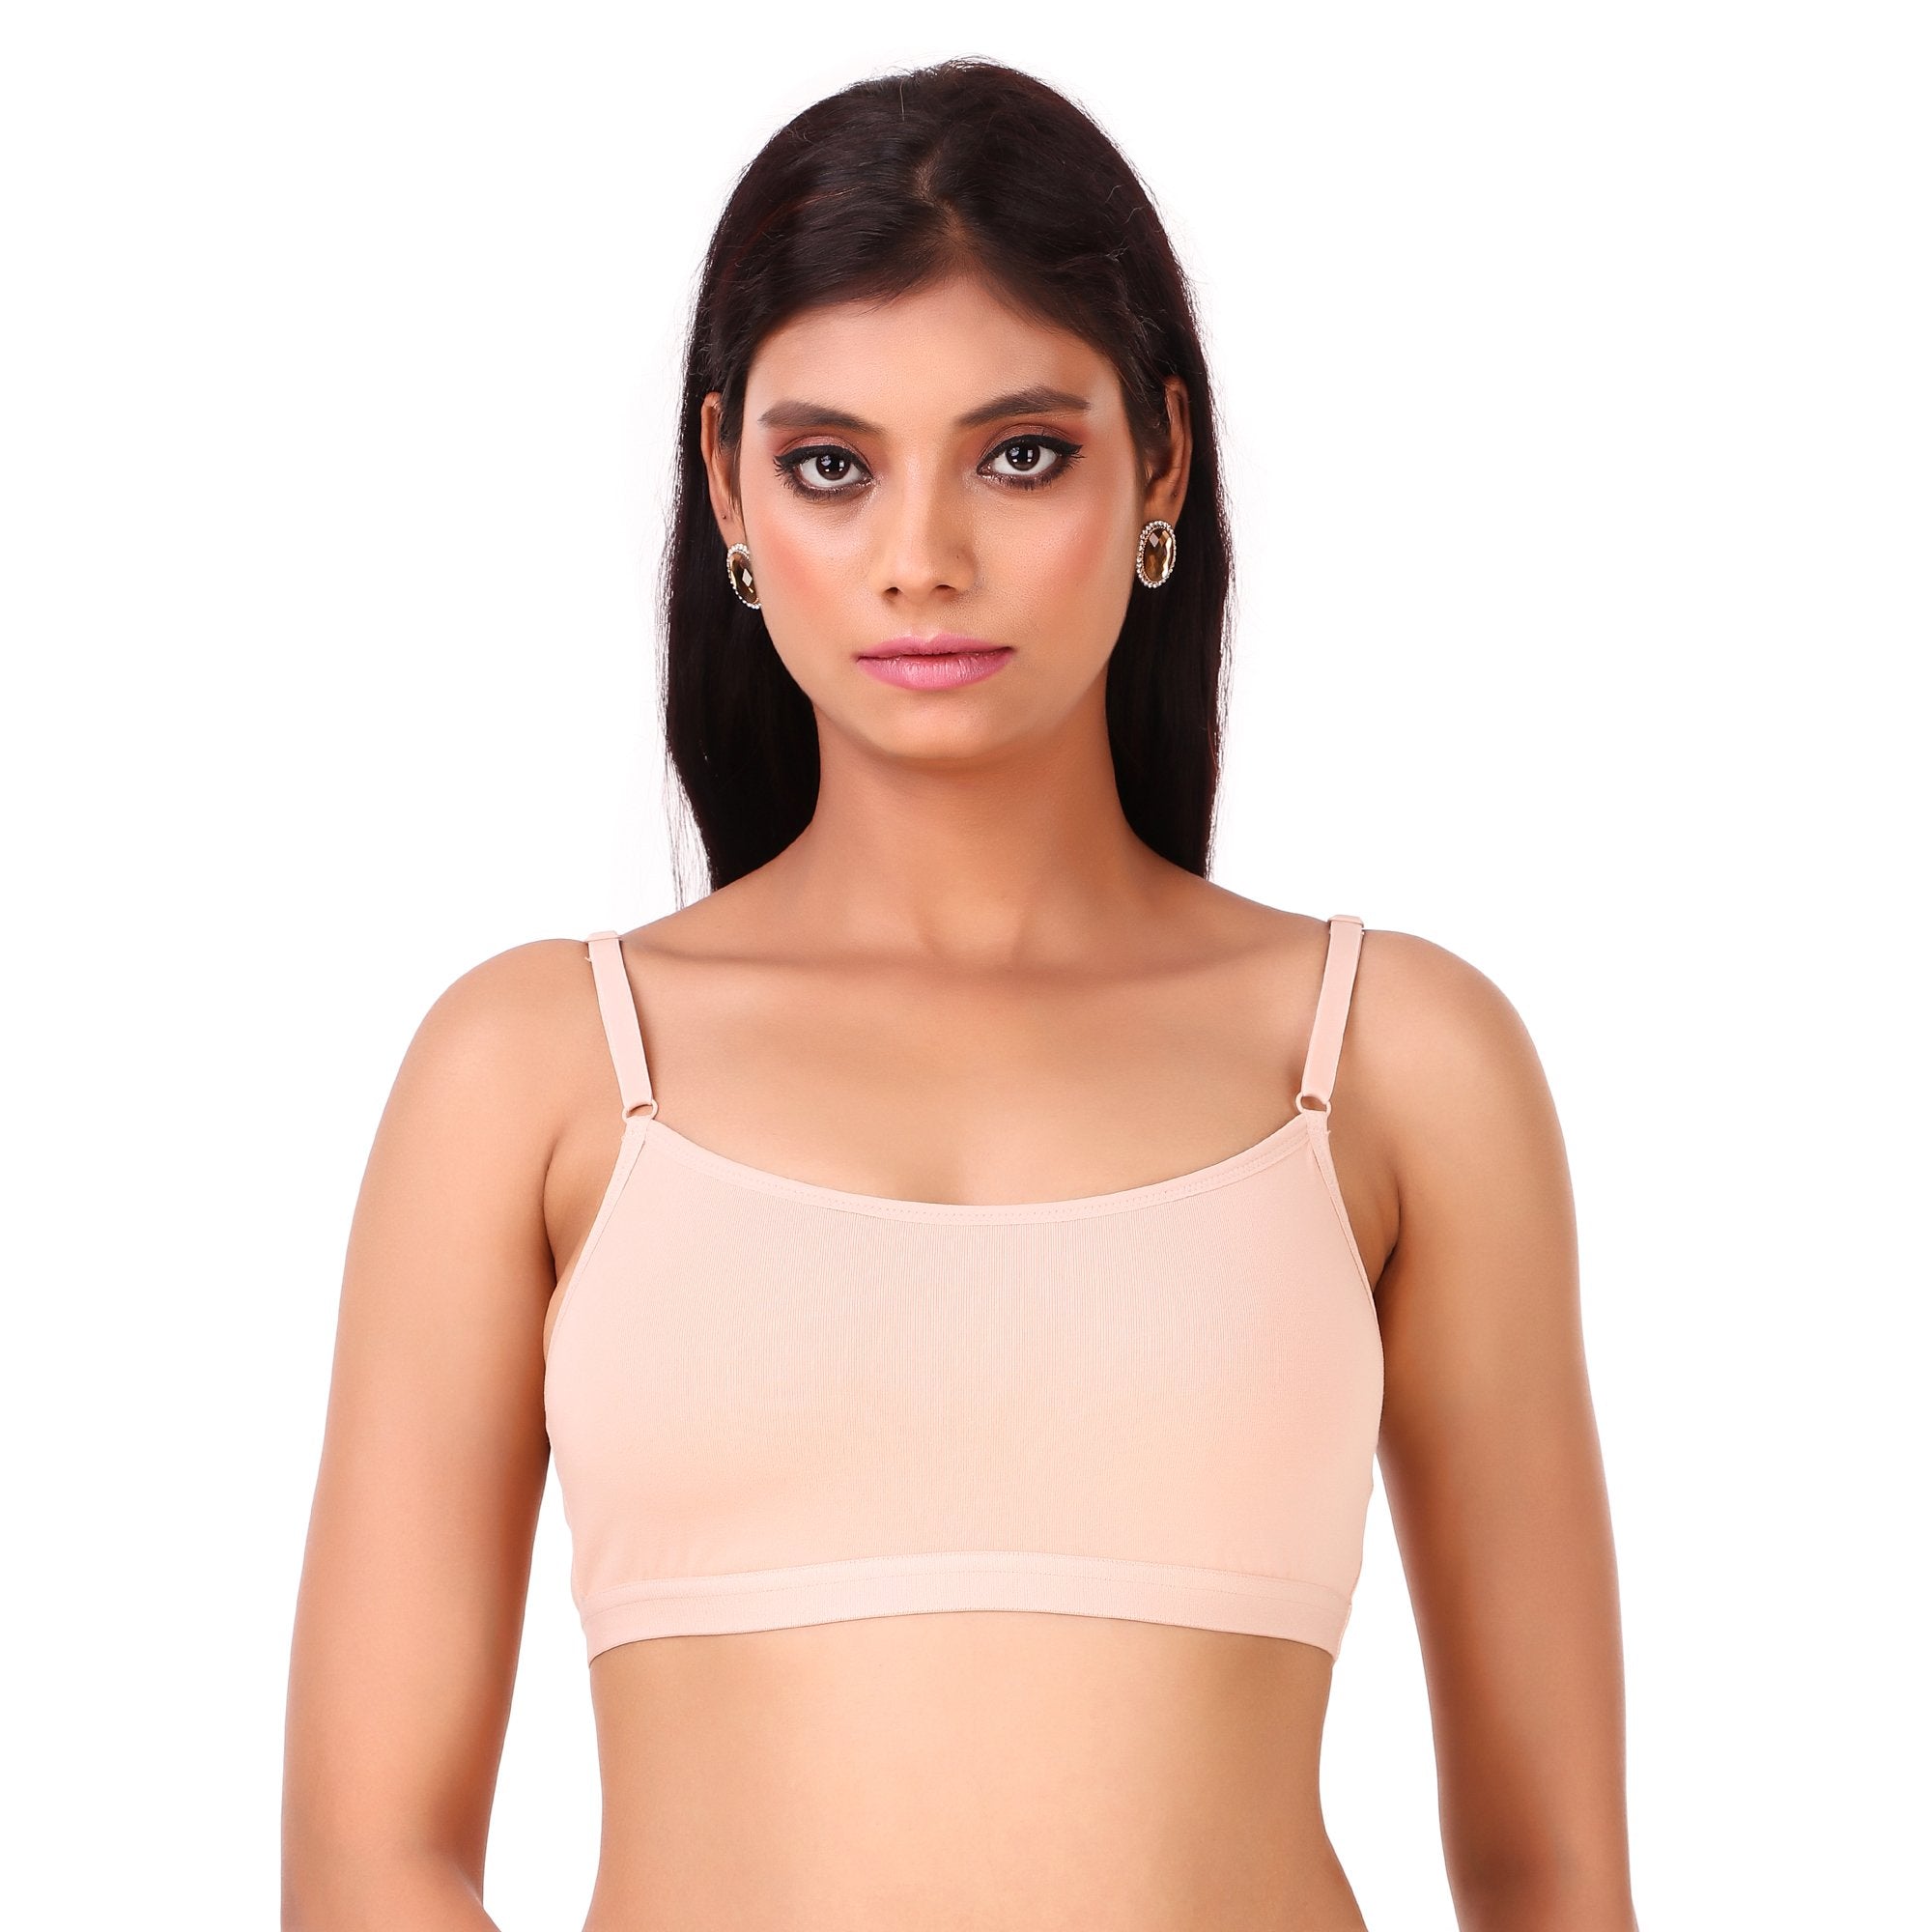 Best Workout Bra's by Bodycare Premium Sports Bra that makes your  activities more active and Flexible. Comfortable to wear throughout the